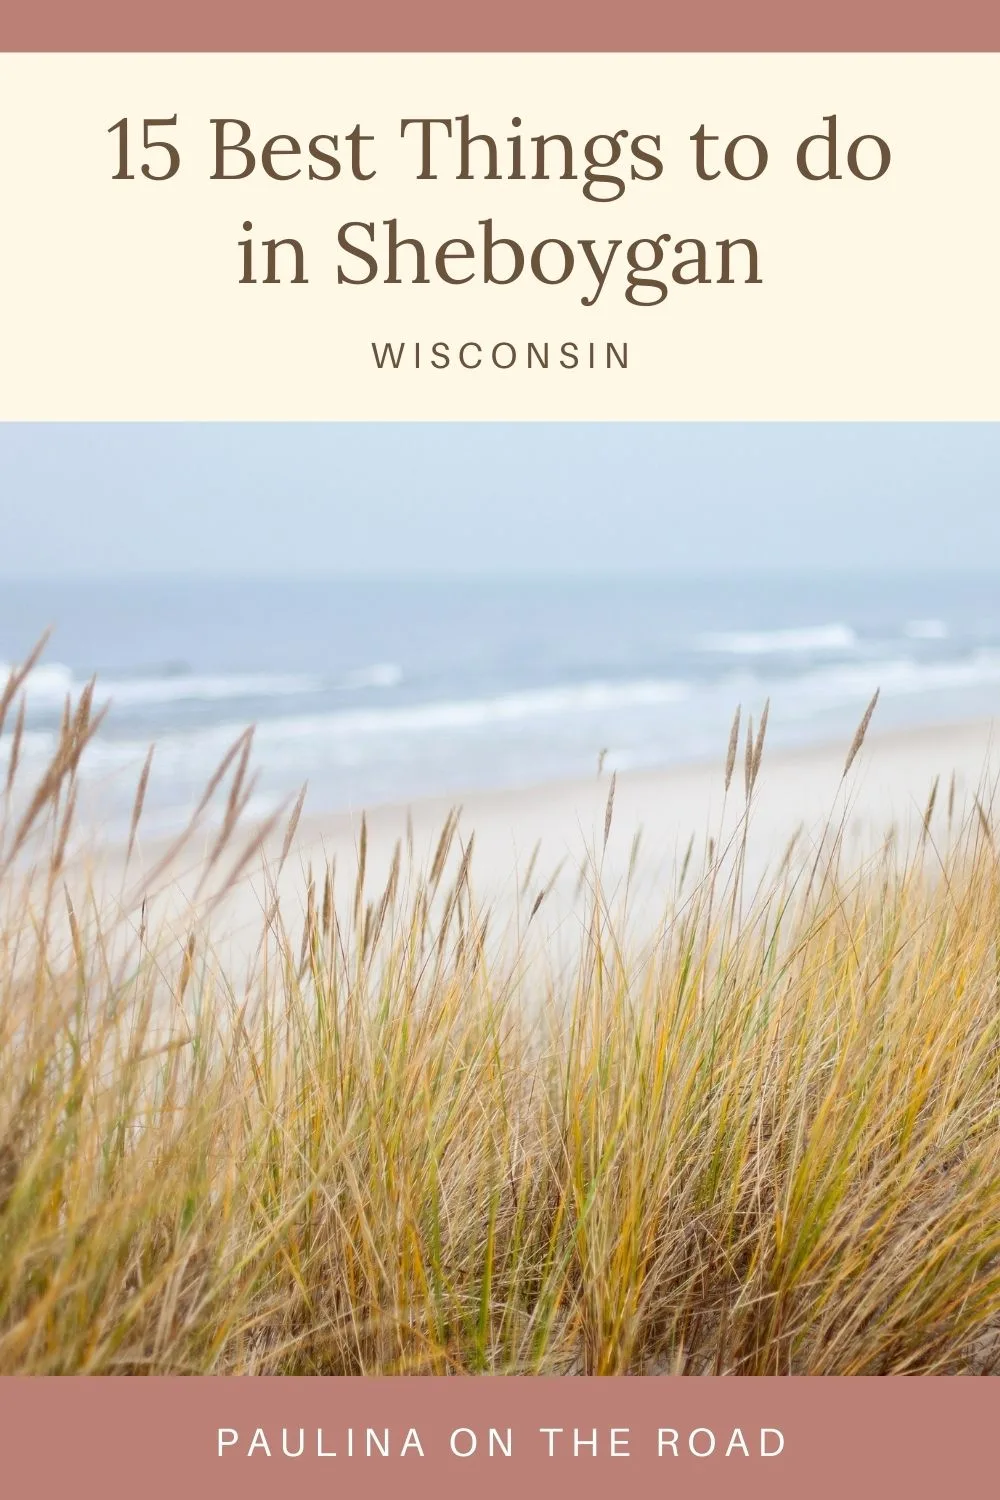 Are you planning a trip to the city of Sheboygan, Wisconsin? This underrated Wisconsin city doesn't get enough love, but there are lots of fun and unique things to do in Sheboygan, WI. This guide has all the best Sheboygan attractions and things to do in the city and county of Sheboygan, with everything from hiking through Kohler-Andrae State Park and a board game cafe. #Sheboygan #Wisconsin #EastWisconsin #KohlerAndrae #Hiking #CentralWisconsin #LakeMichigan #ElkhartLake #USATravel #Museums